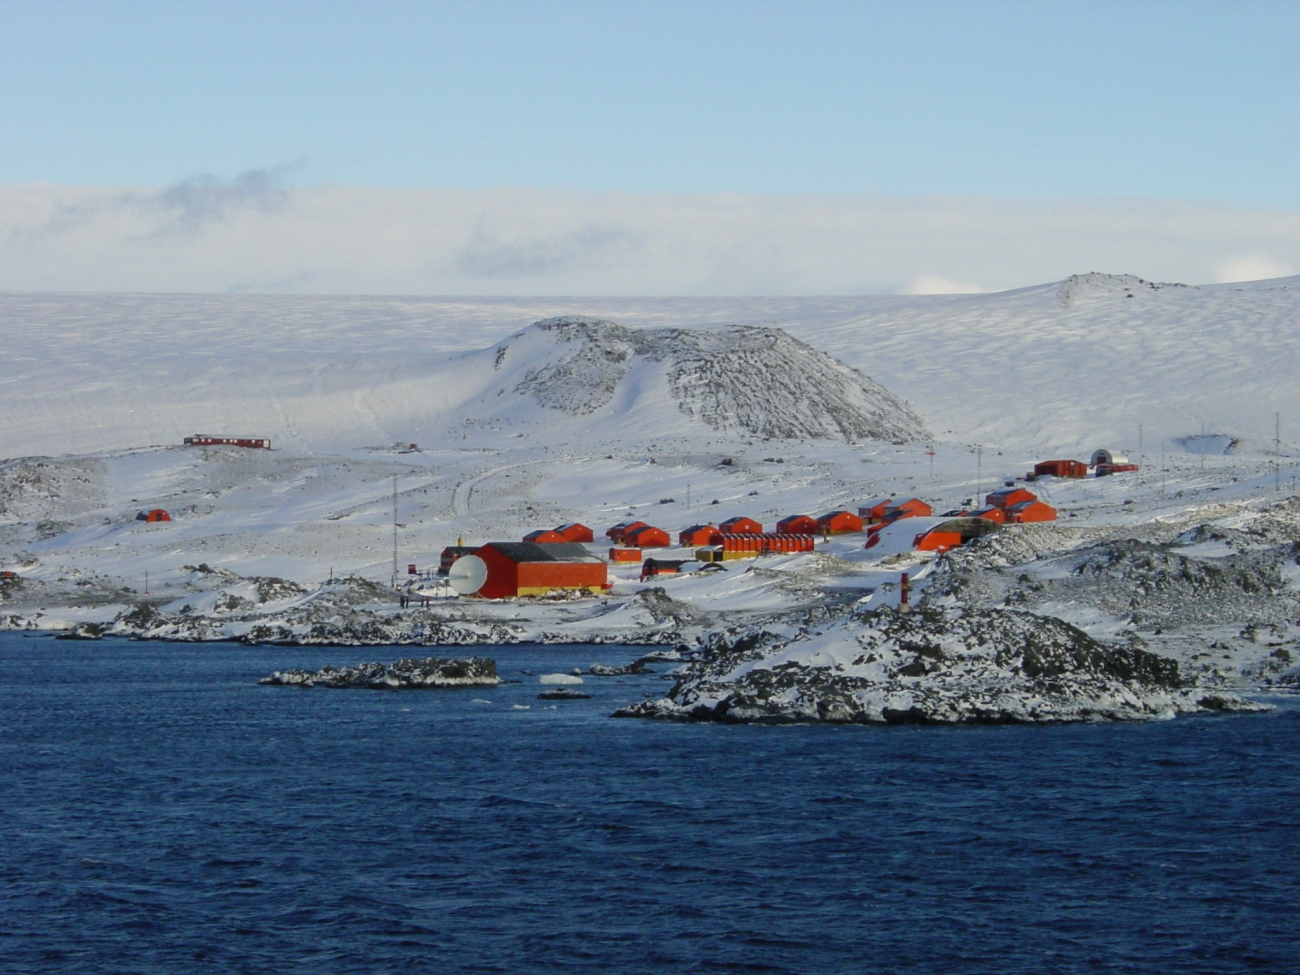 A base camp for observing penguins and marine mammals as well as otherscientific observations